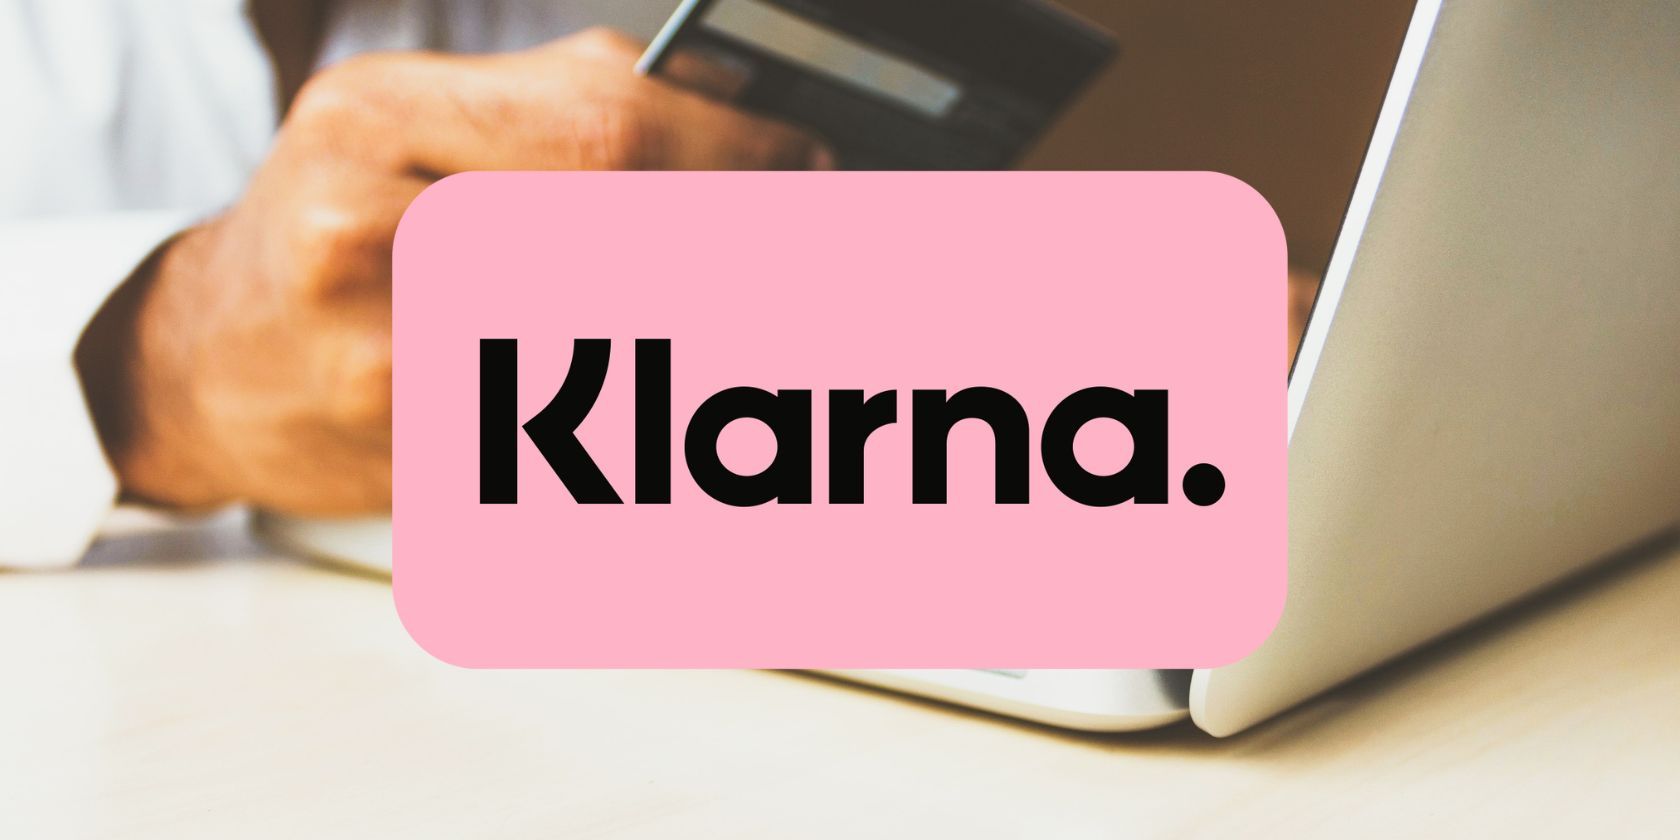 klarna logo in front of person online shopping